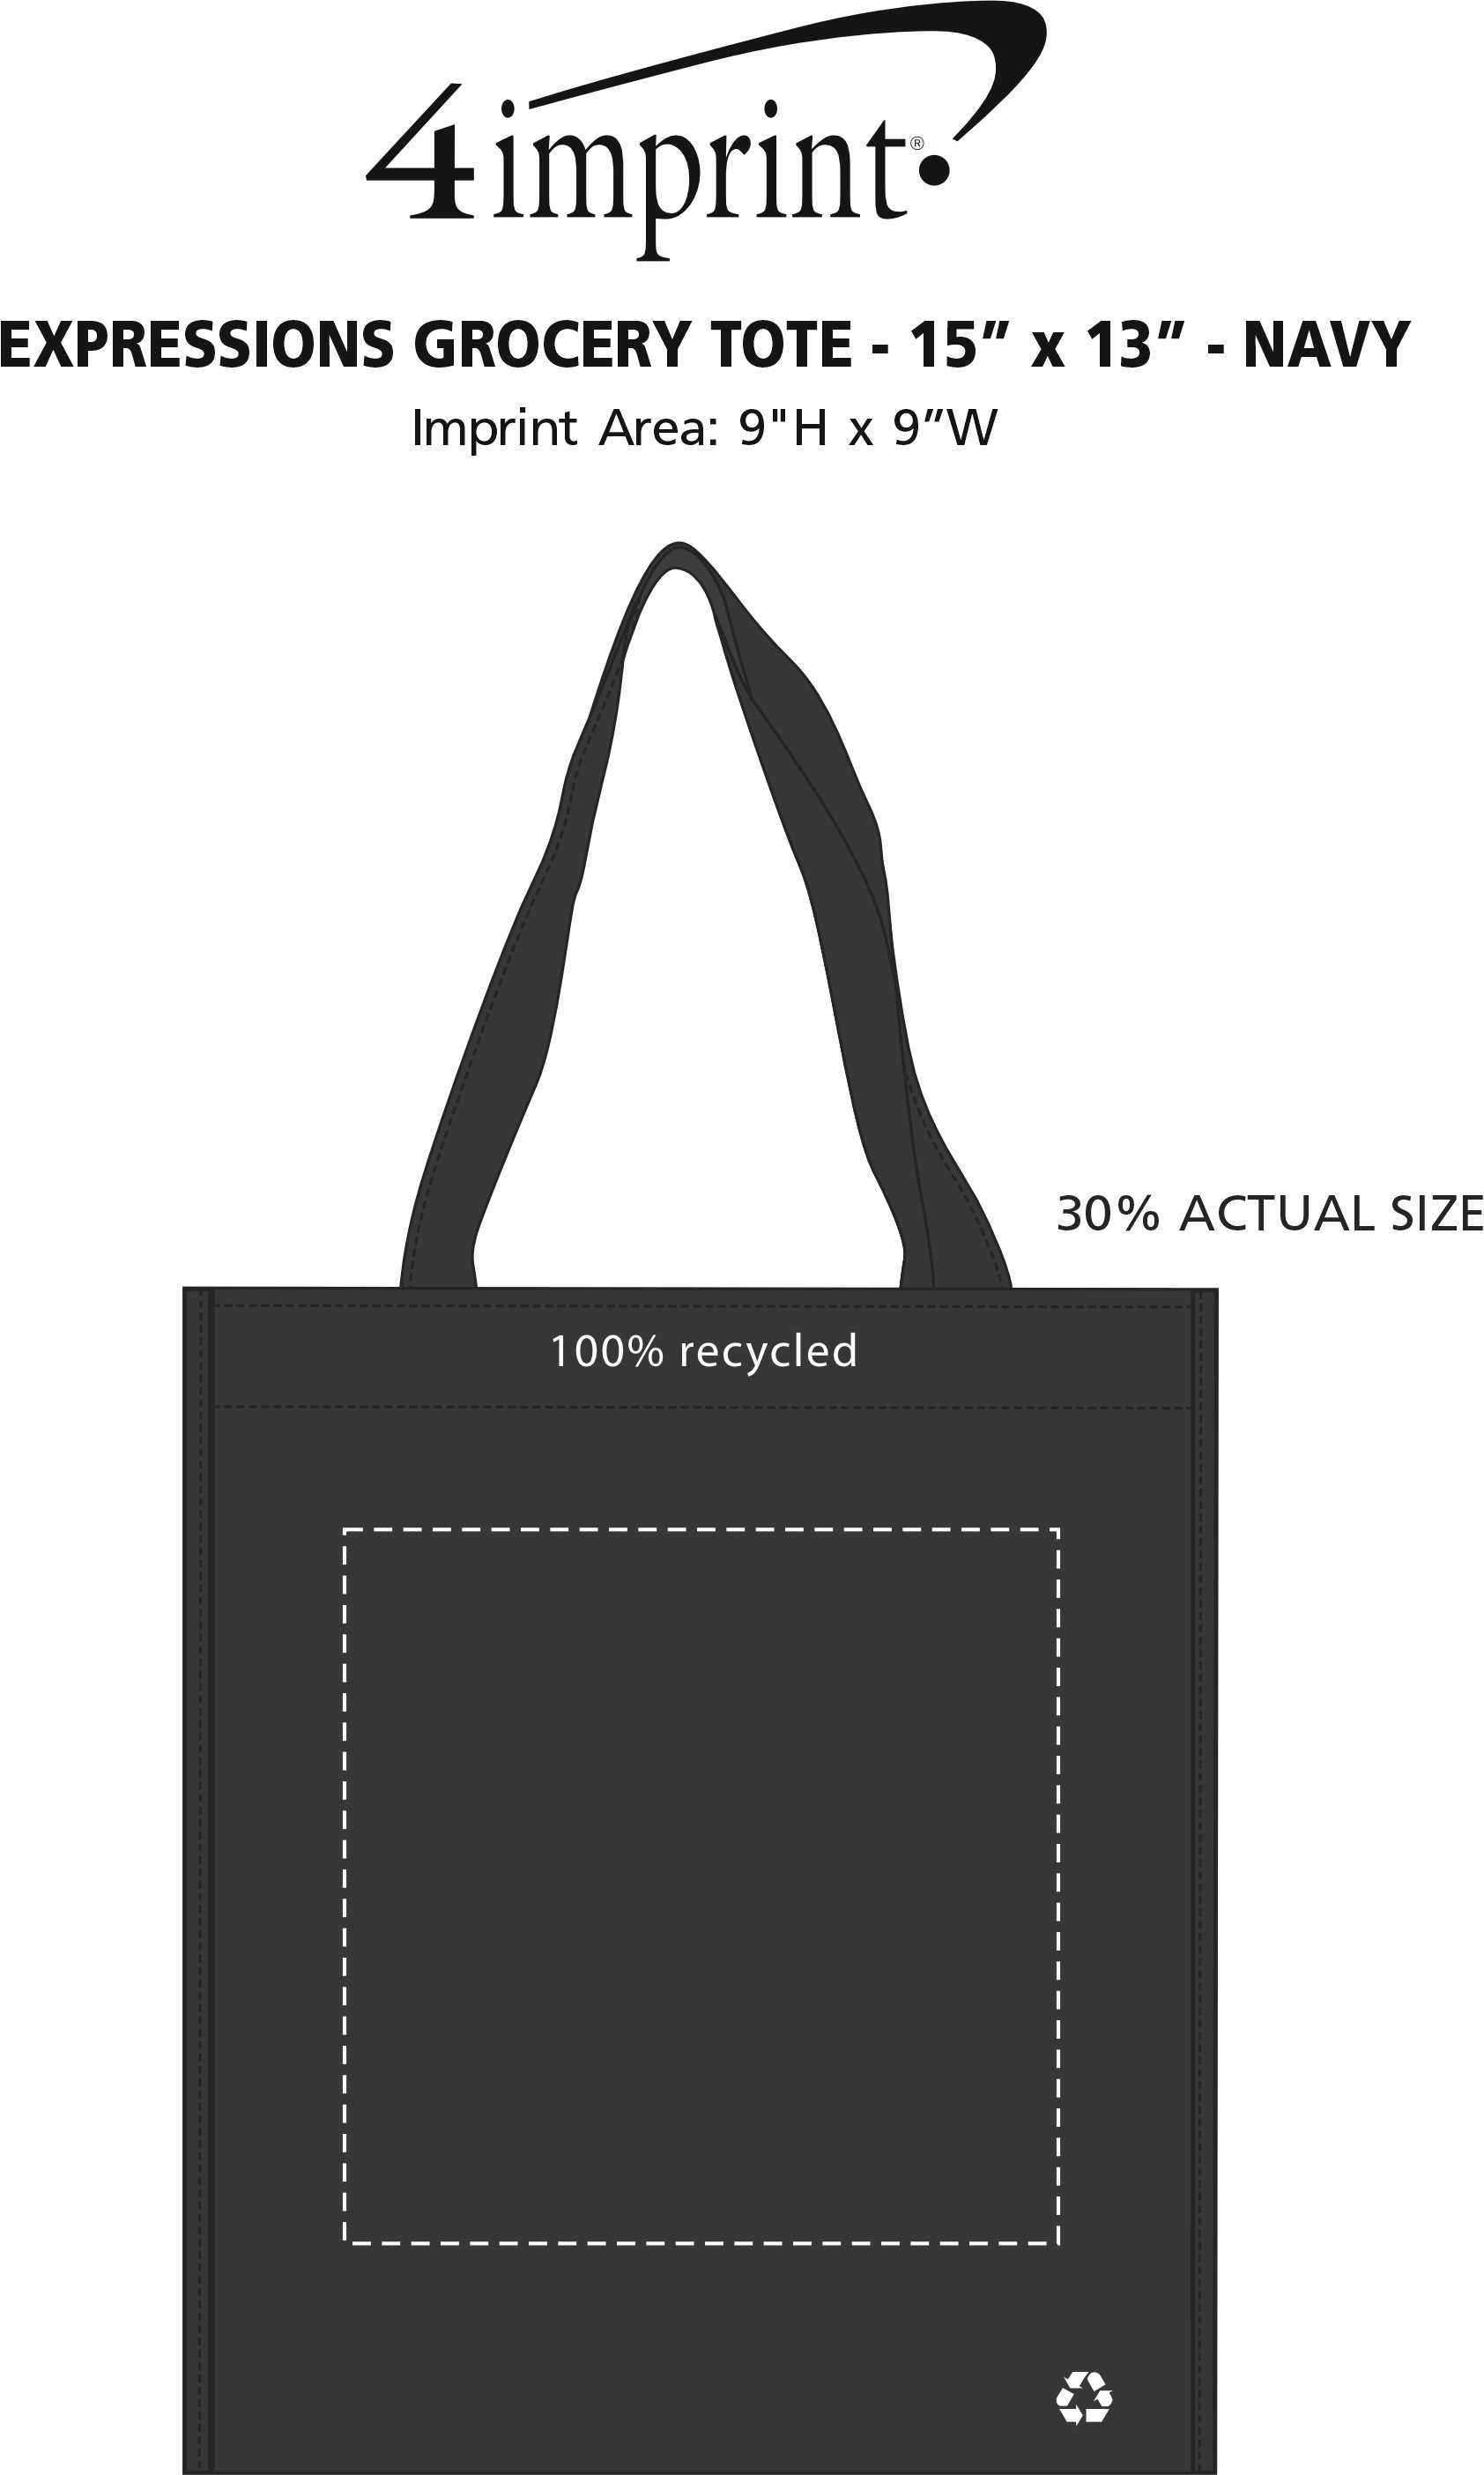 Imprint Area of Expressions Grocery Tote - Navy